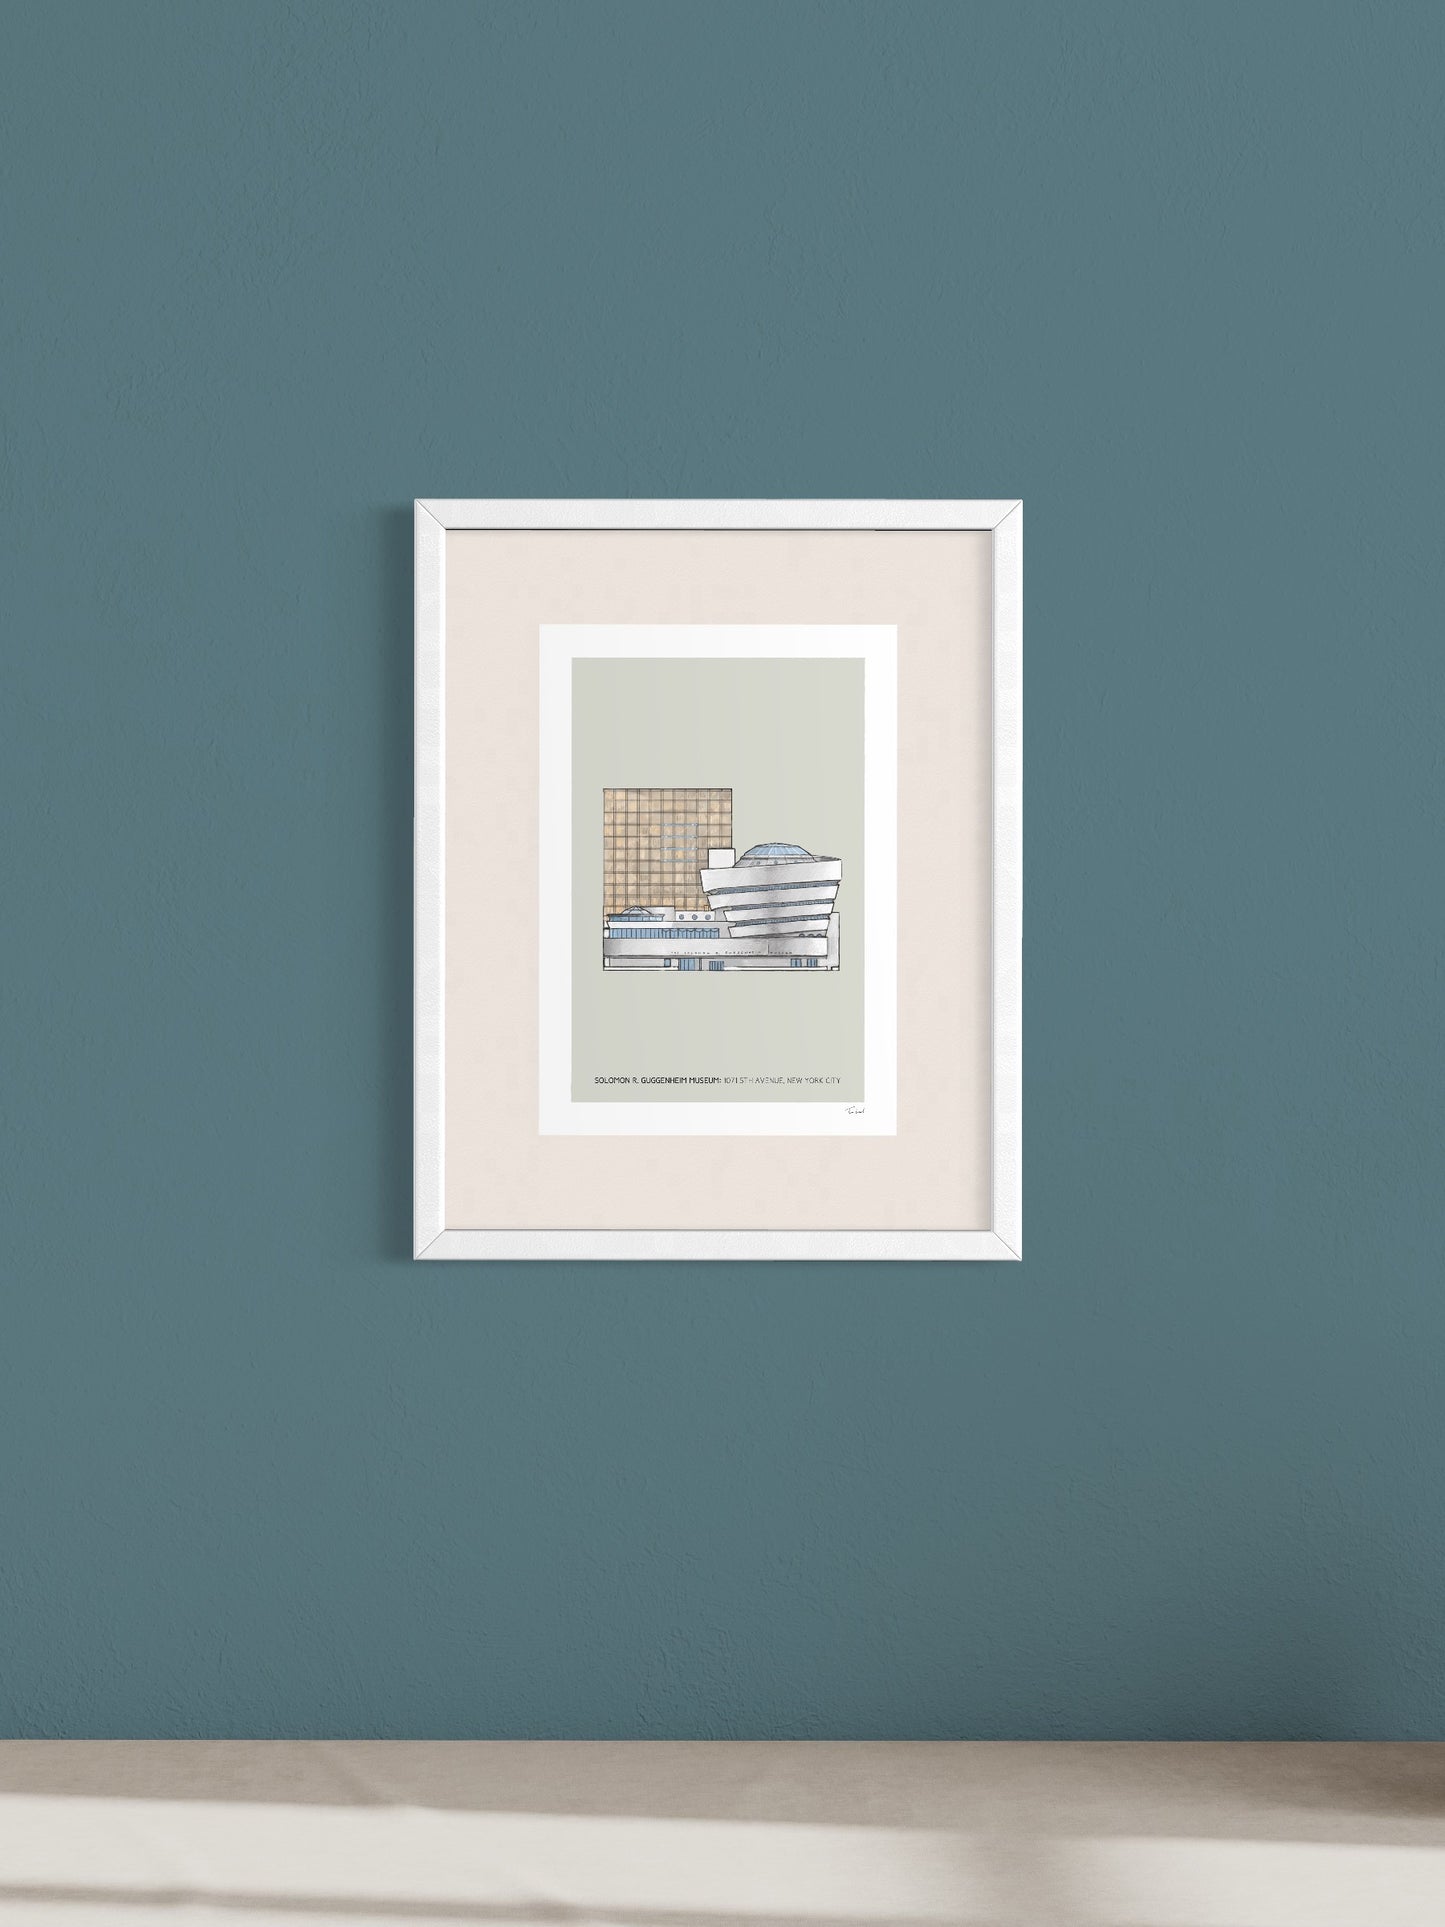 This image shows a giclee wall art print by Tom Laird Illustration of the world-famous New York City landmark the Guggenheim Museum, framed in a beautiful living room with tasteful modern home decor. This art print is available from Tom Laird Illustration in A4 size.